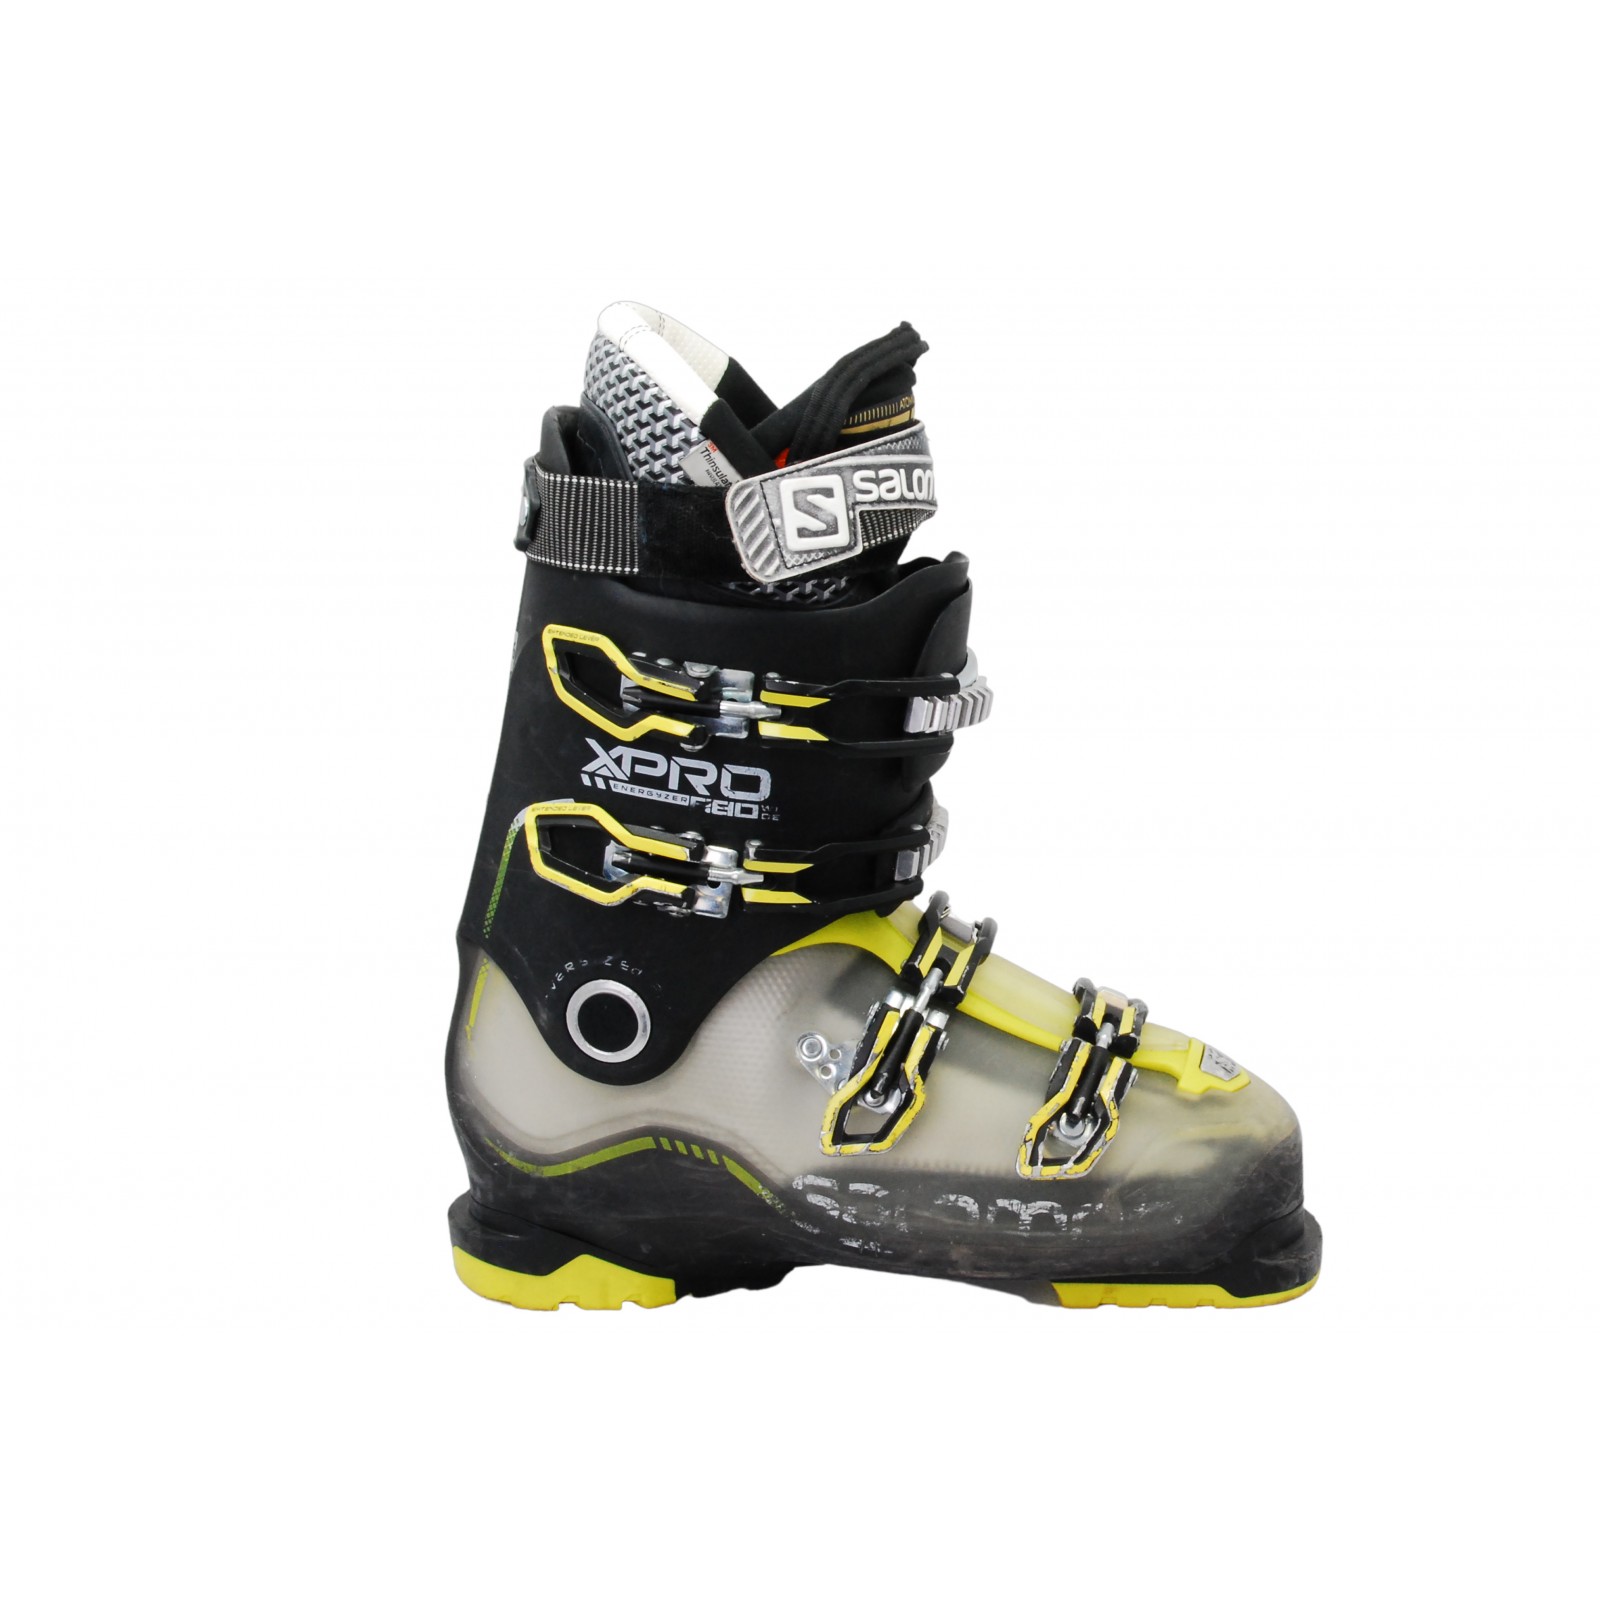 Ski Boots SALOMON X PRO R80 WIDE, BLACK/yellow, OVERSIZED EXTENDED Lever, 3D Buckle, Micro, Macro | thepadoctor.com